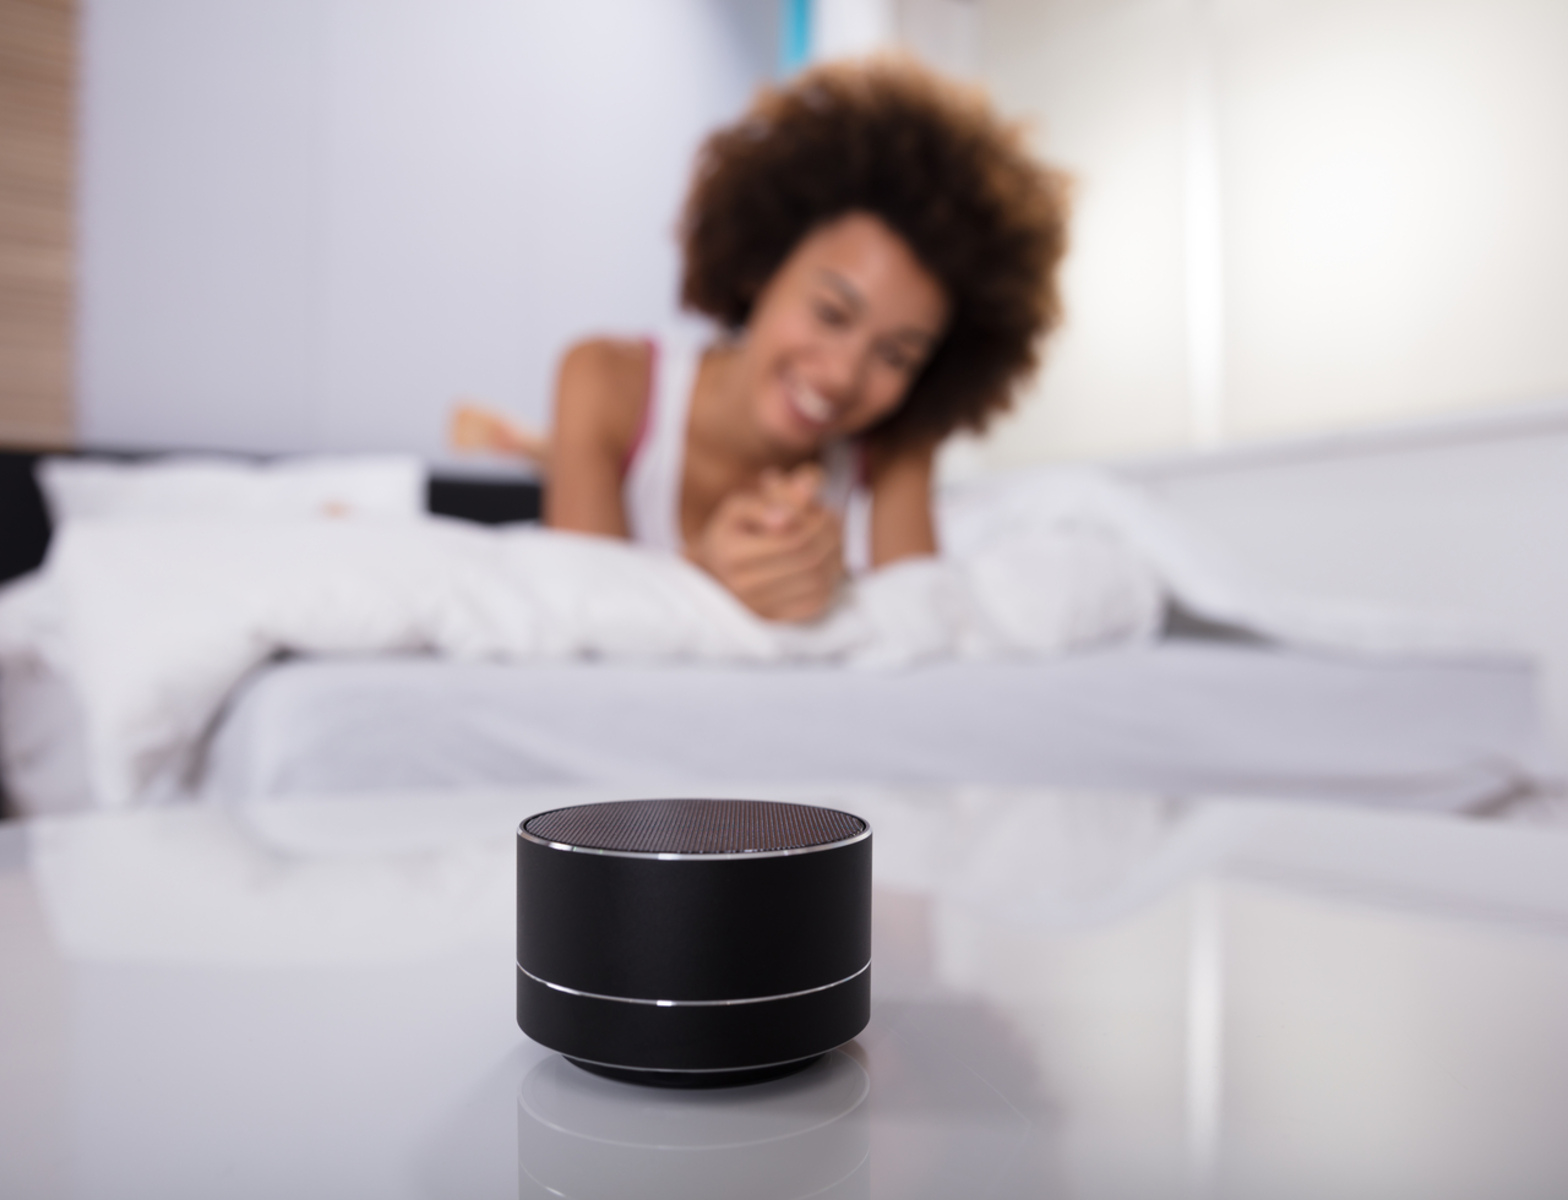 What Can Be Done To Improve Smart Speaker Security